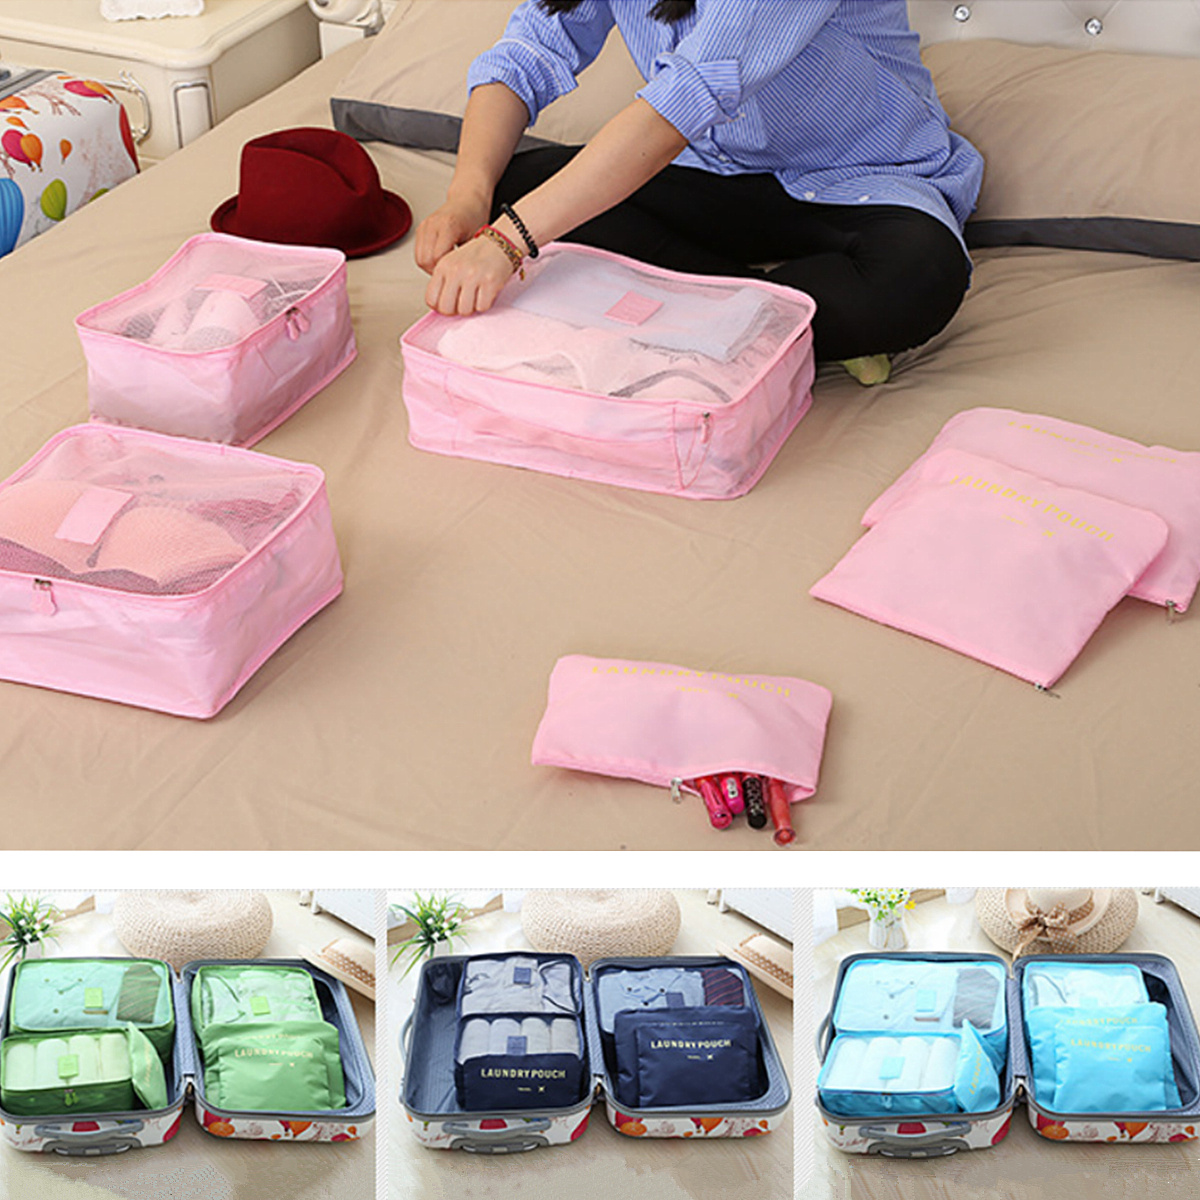 IPReetrade-6Pcs-Travel-Portable-Storage-Bag-Set-Clothes-Packing-Luggage-Organizer-Waterproof-Pouch-1152893-1